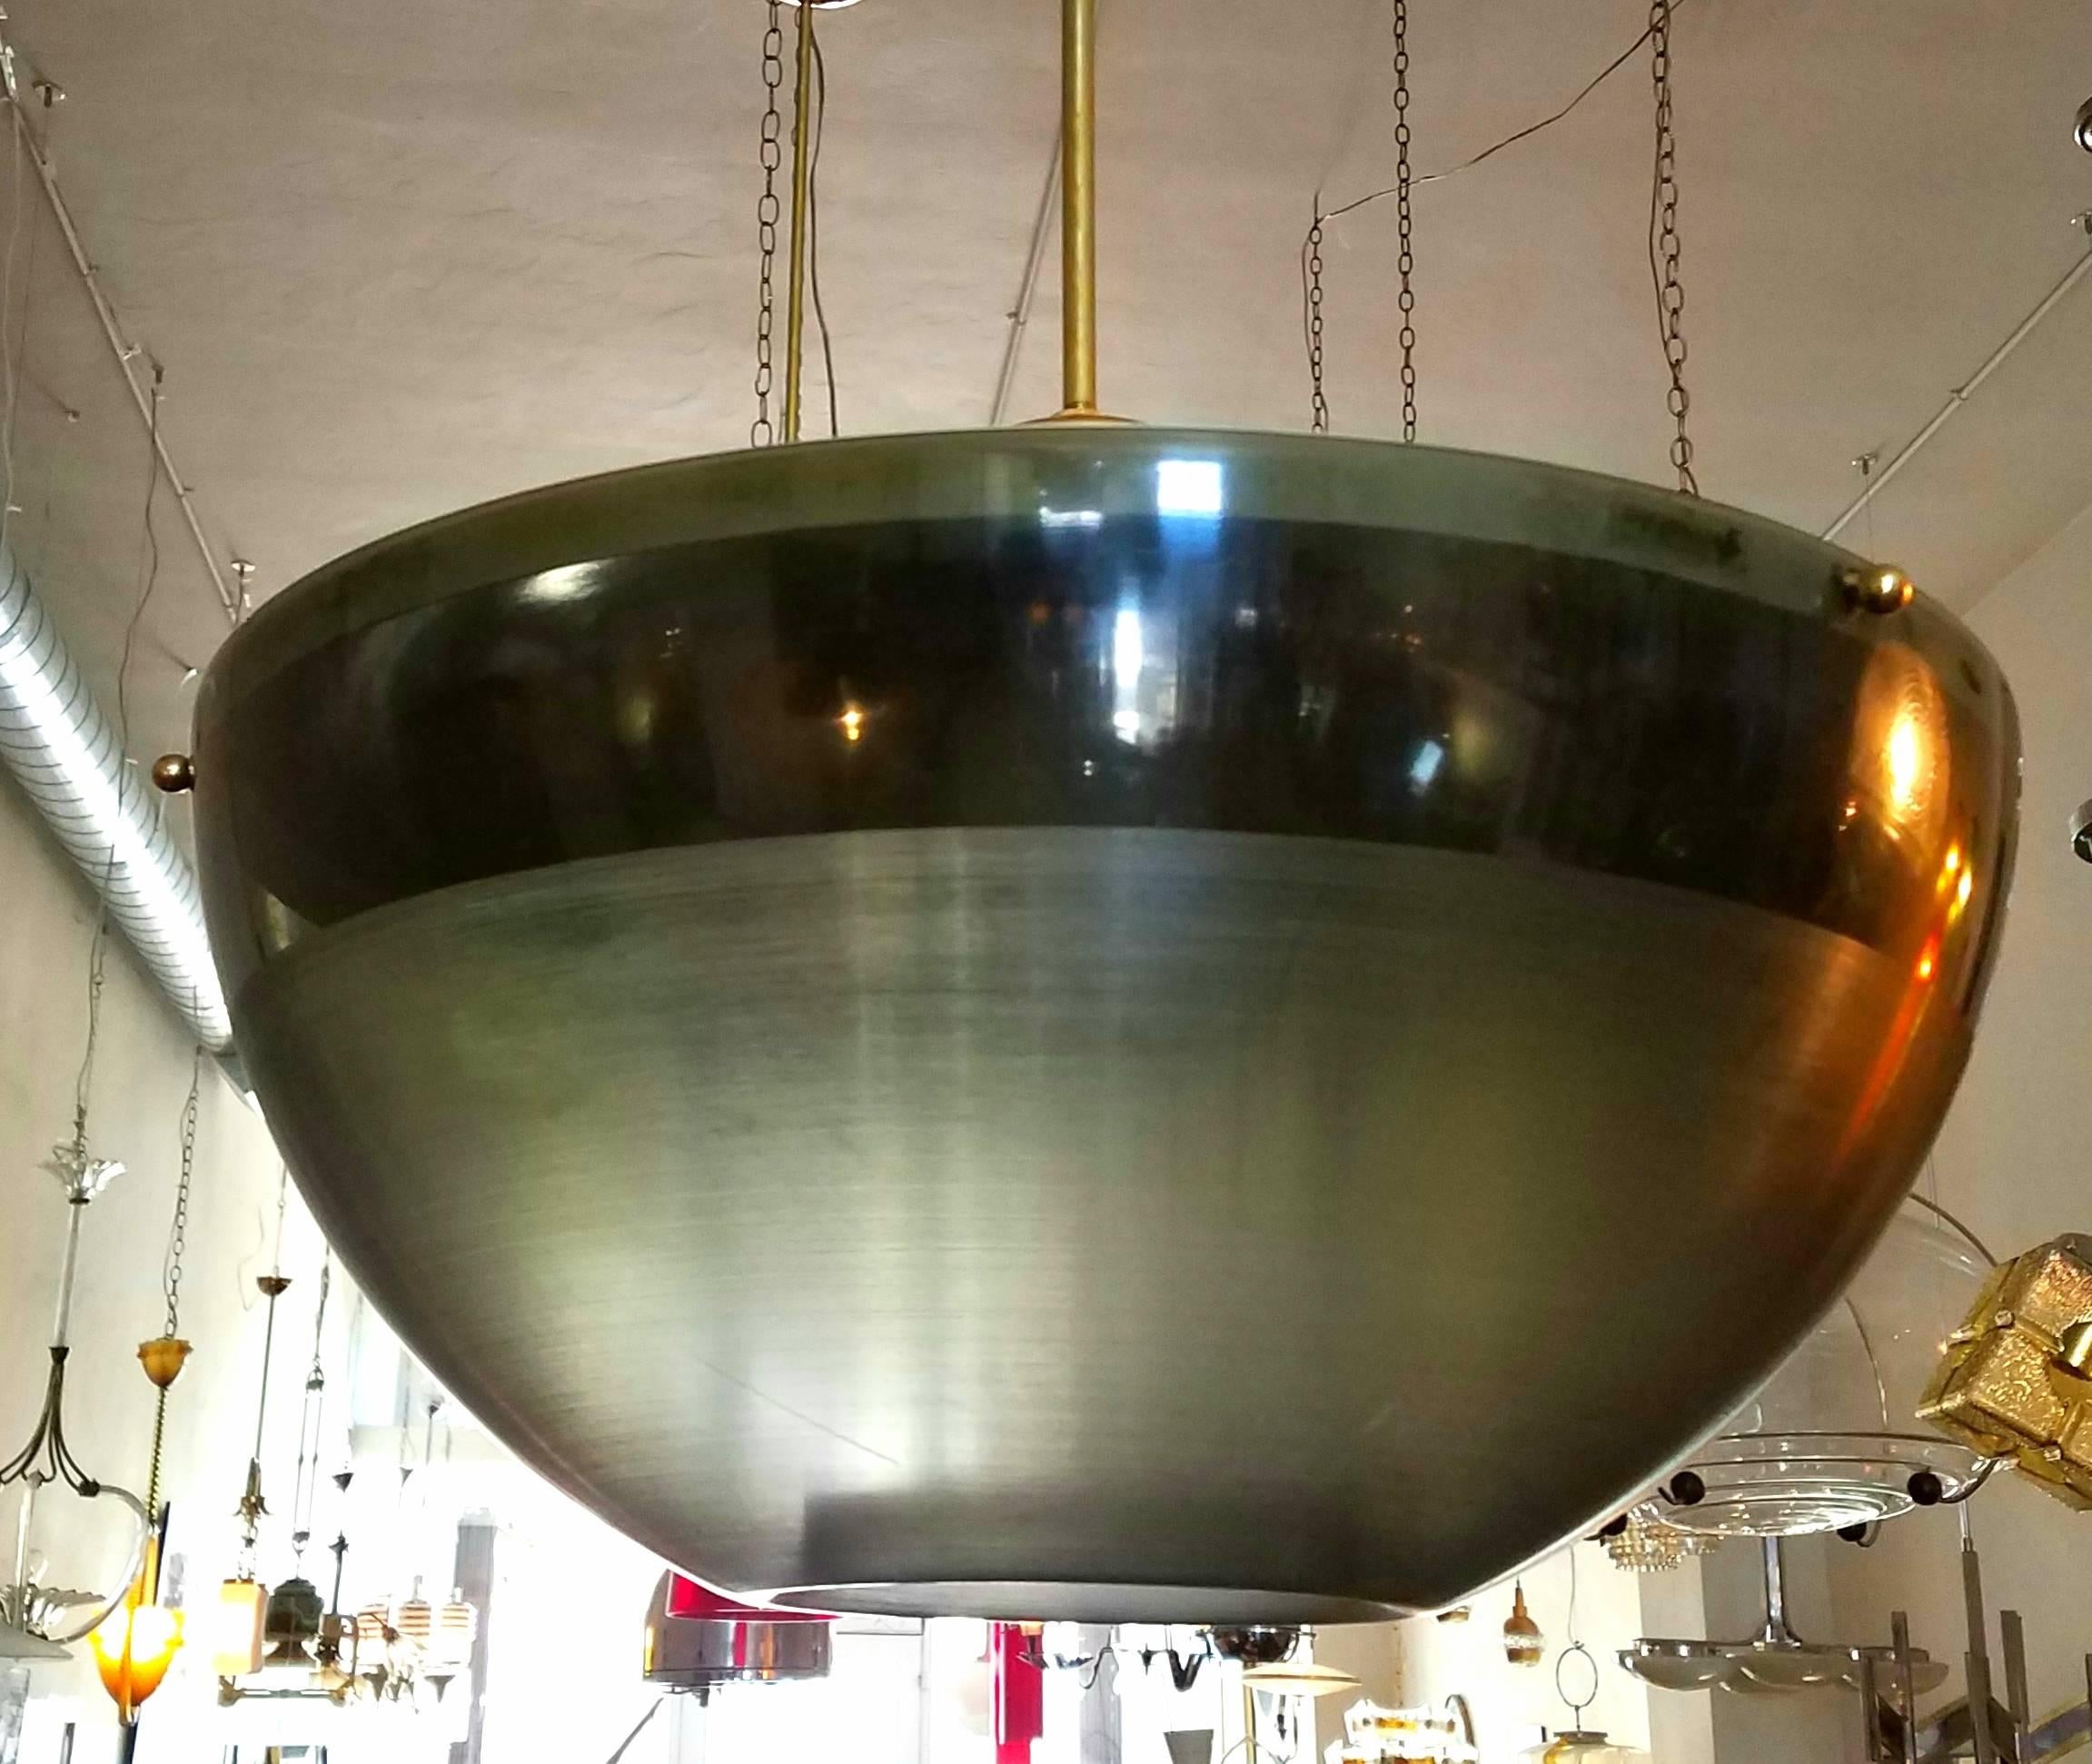 Italian 1970s pair of Guzzini for Meblo pendants. Acrylic shade metal and brass base. The pair of chandeliers are in very good condition Acrylic shades have some minor scratches .
Shipping standard parcel  $245.